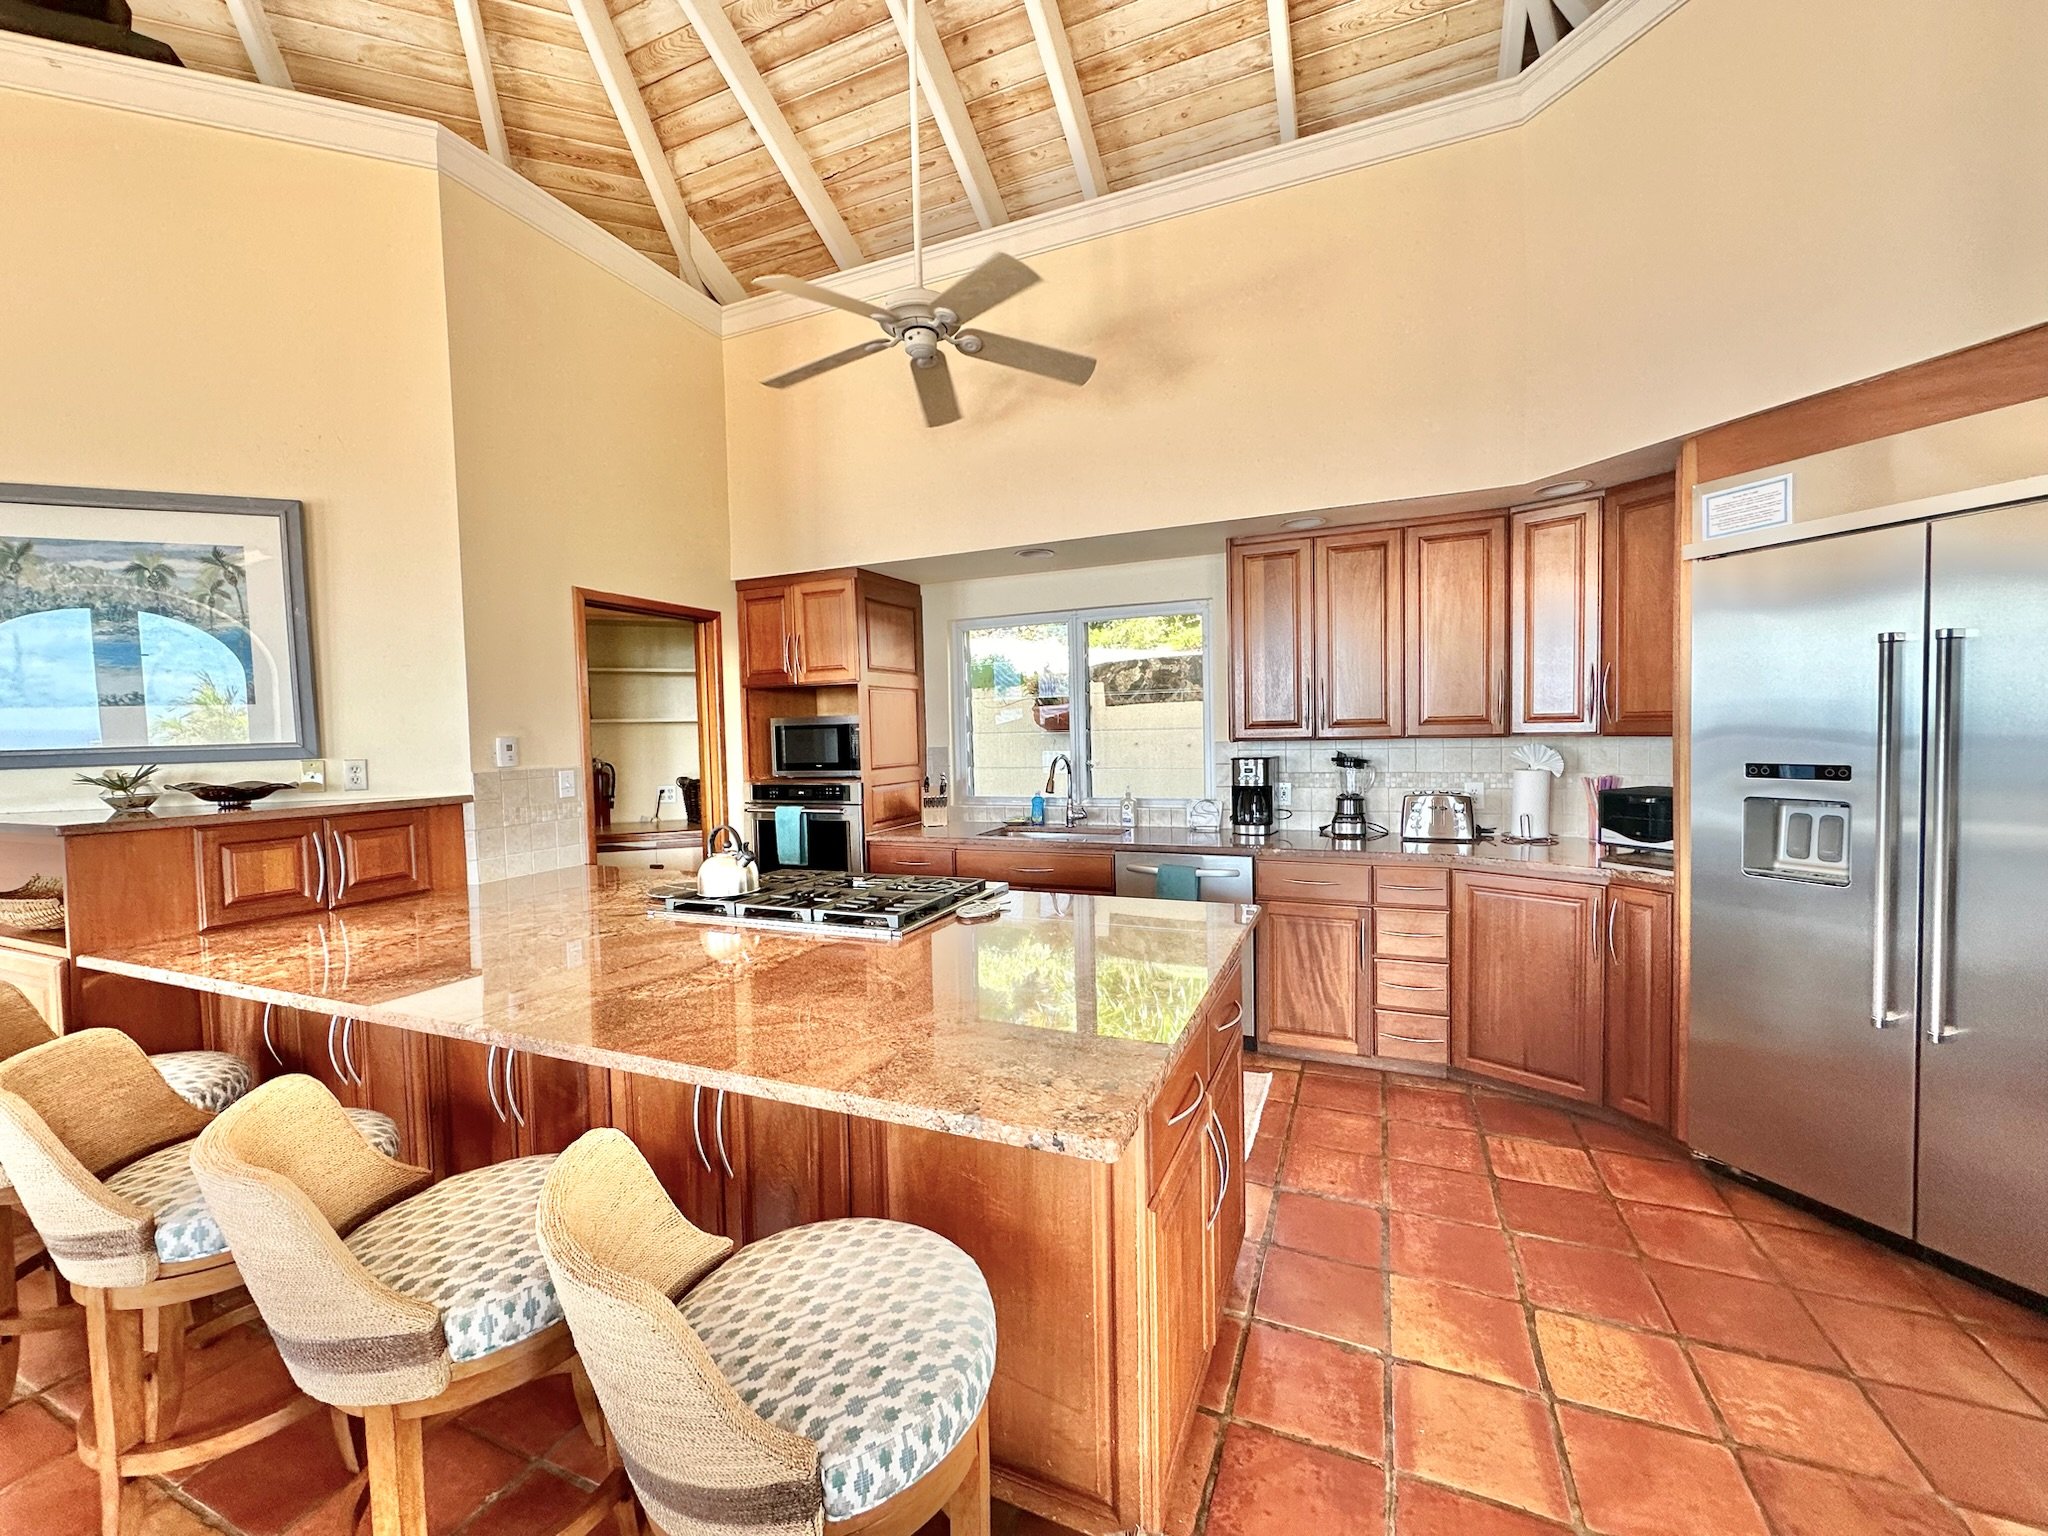 kitchen with 4 chairs at island.JPG